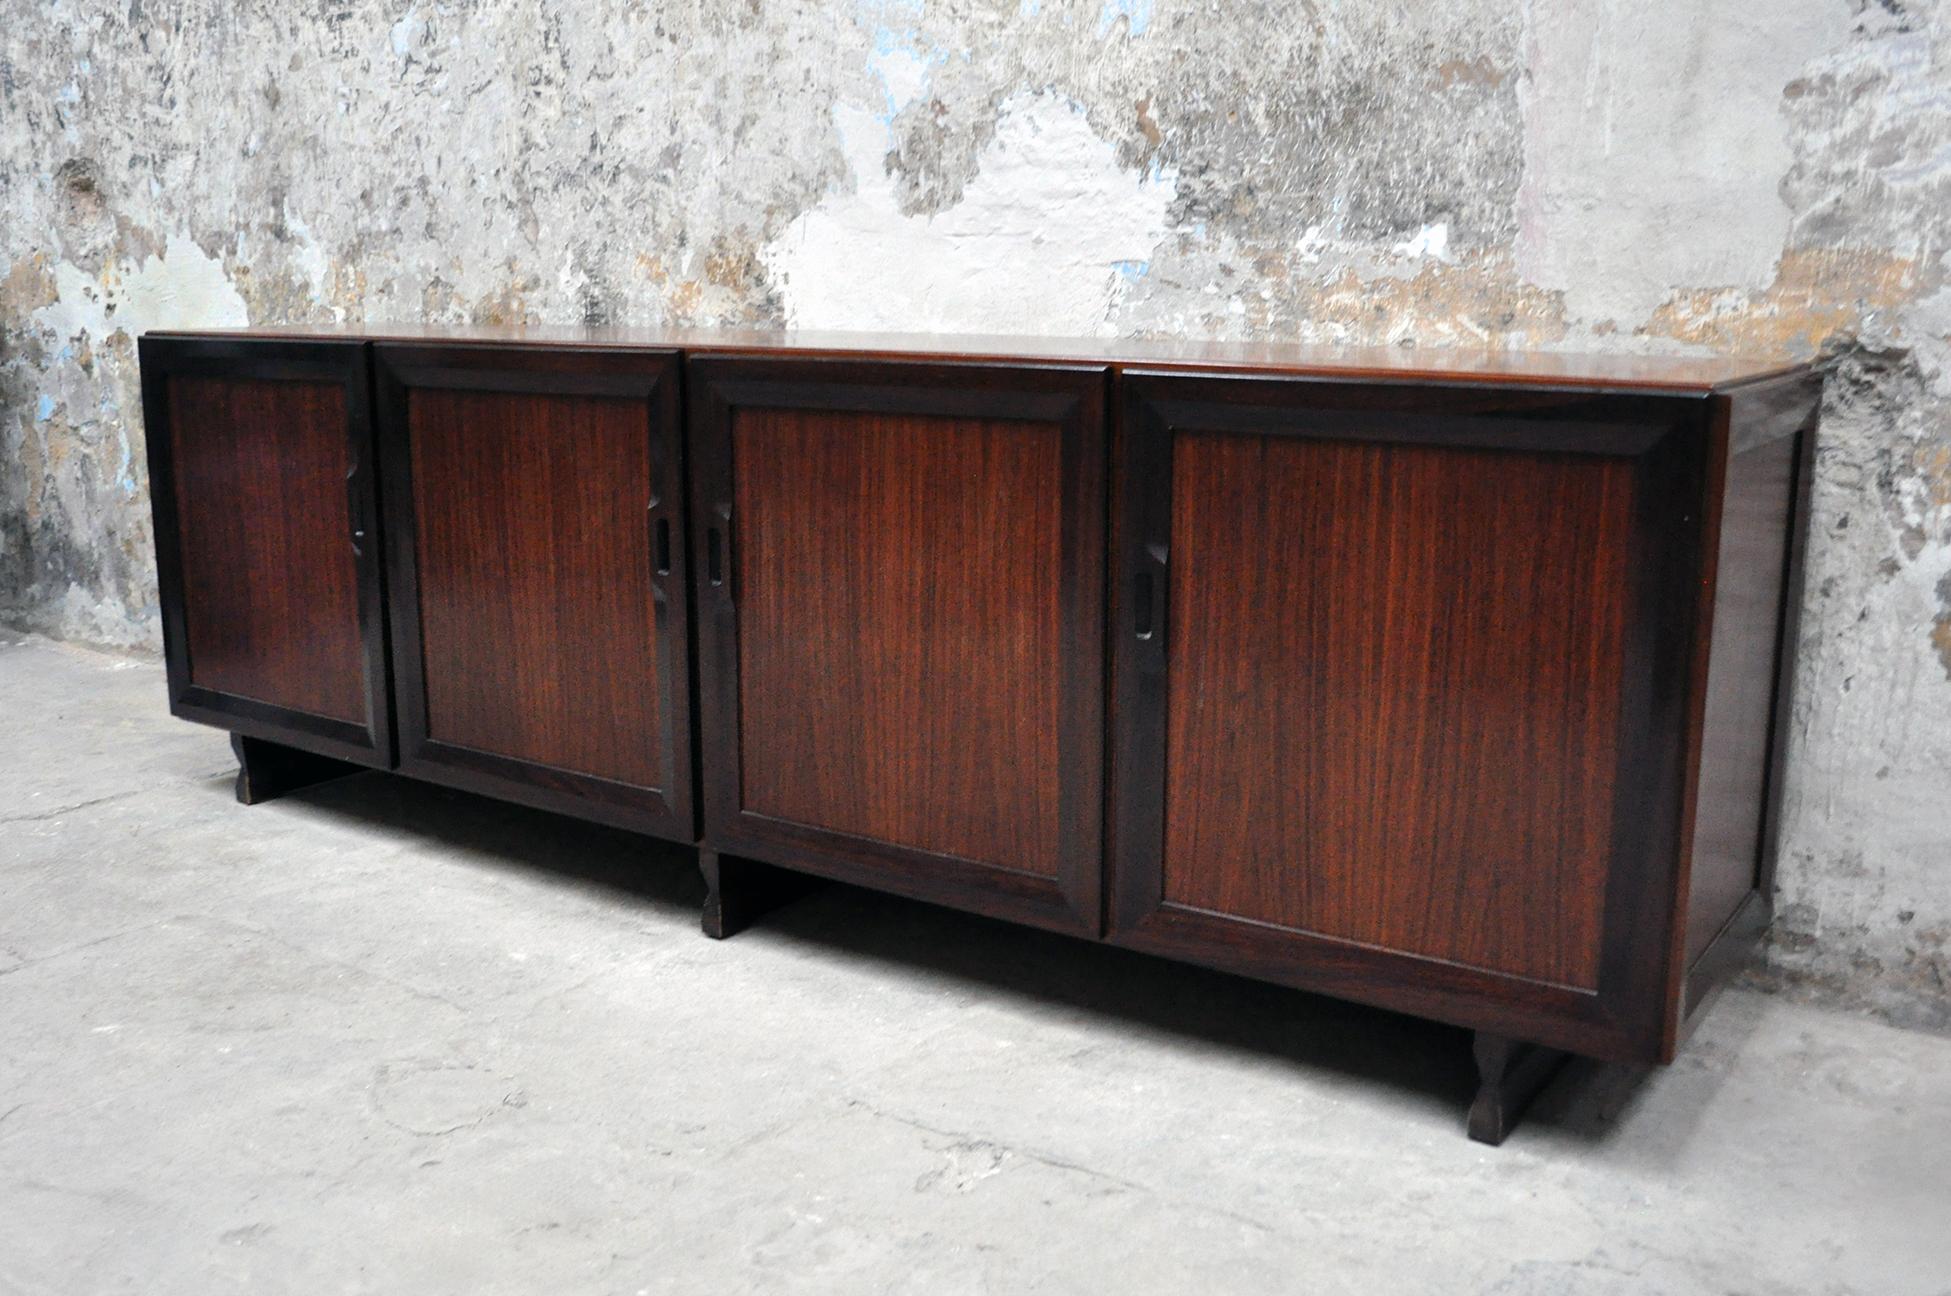 Rosewood sideboard with four compartments
MB15 model
Designer Franco Albini
Manufacturer Poggi
Year 1957.